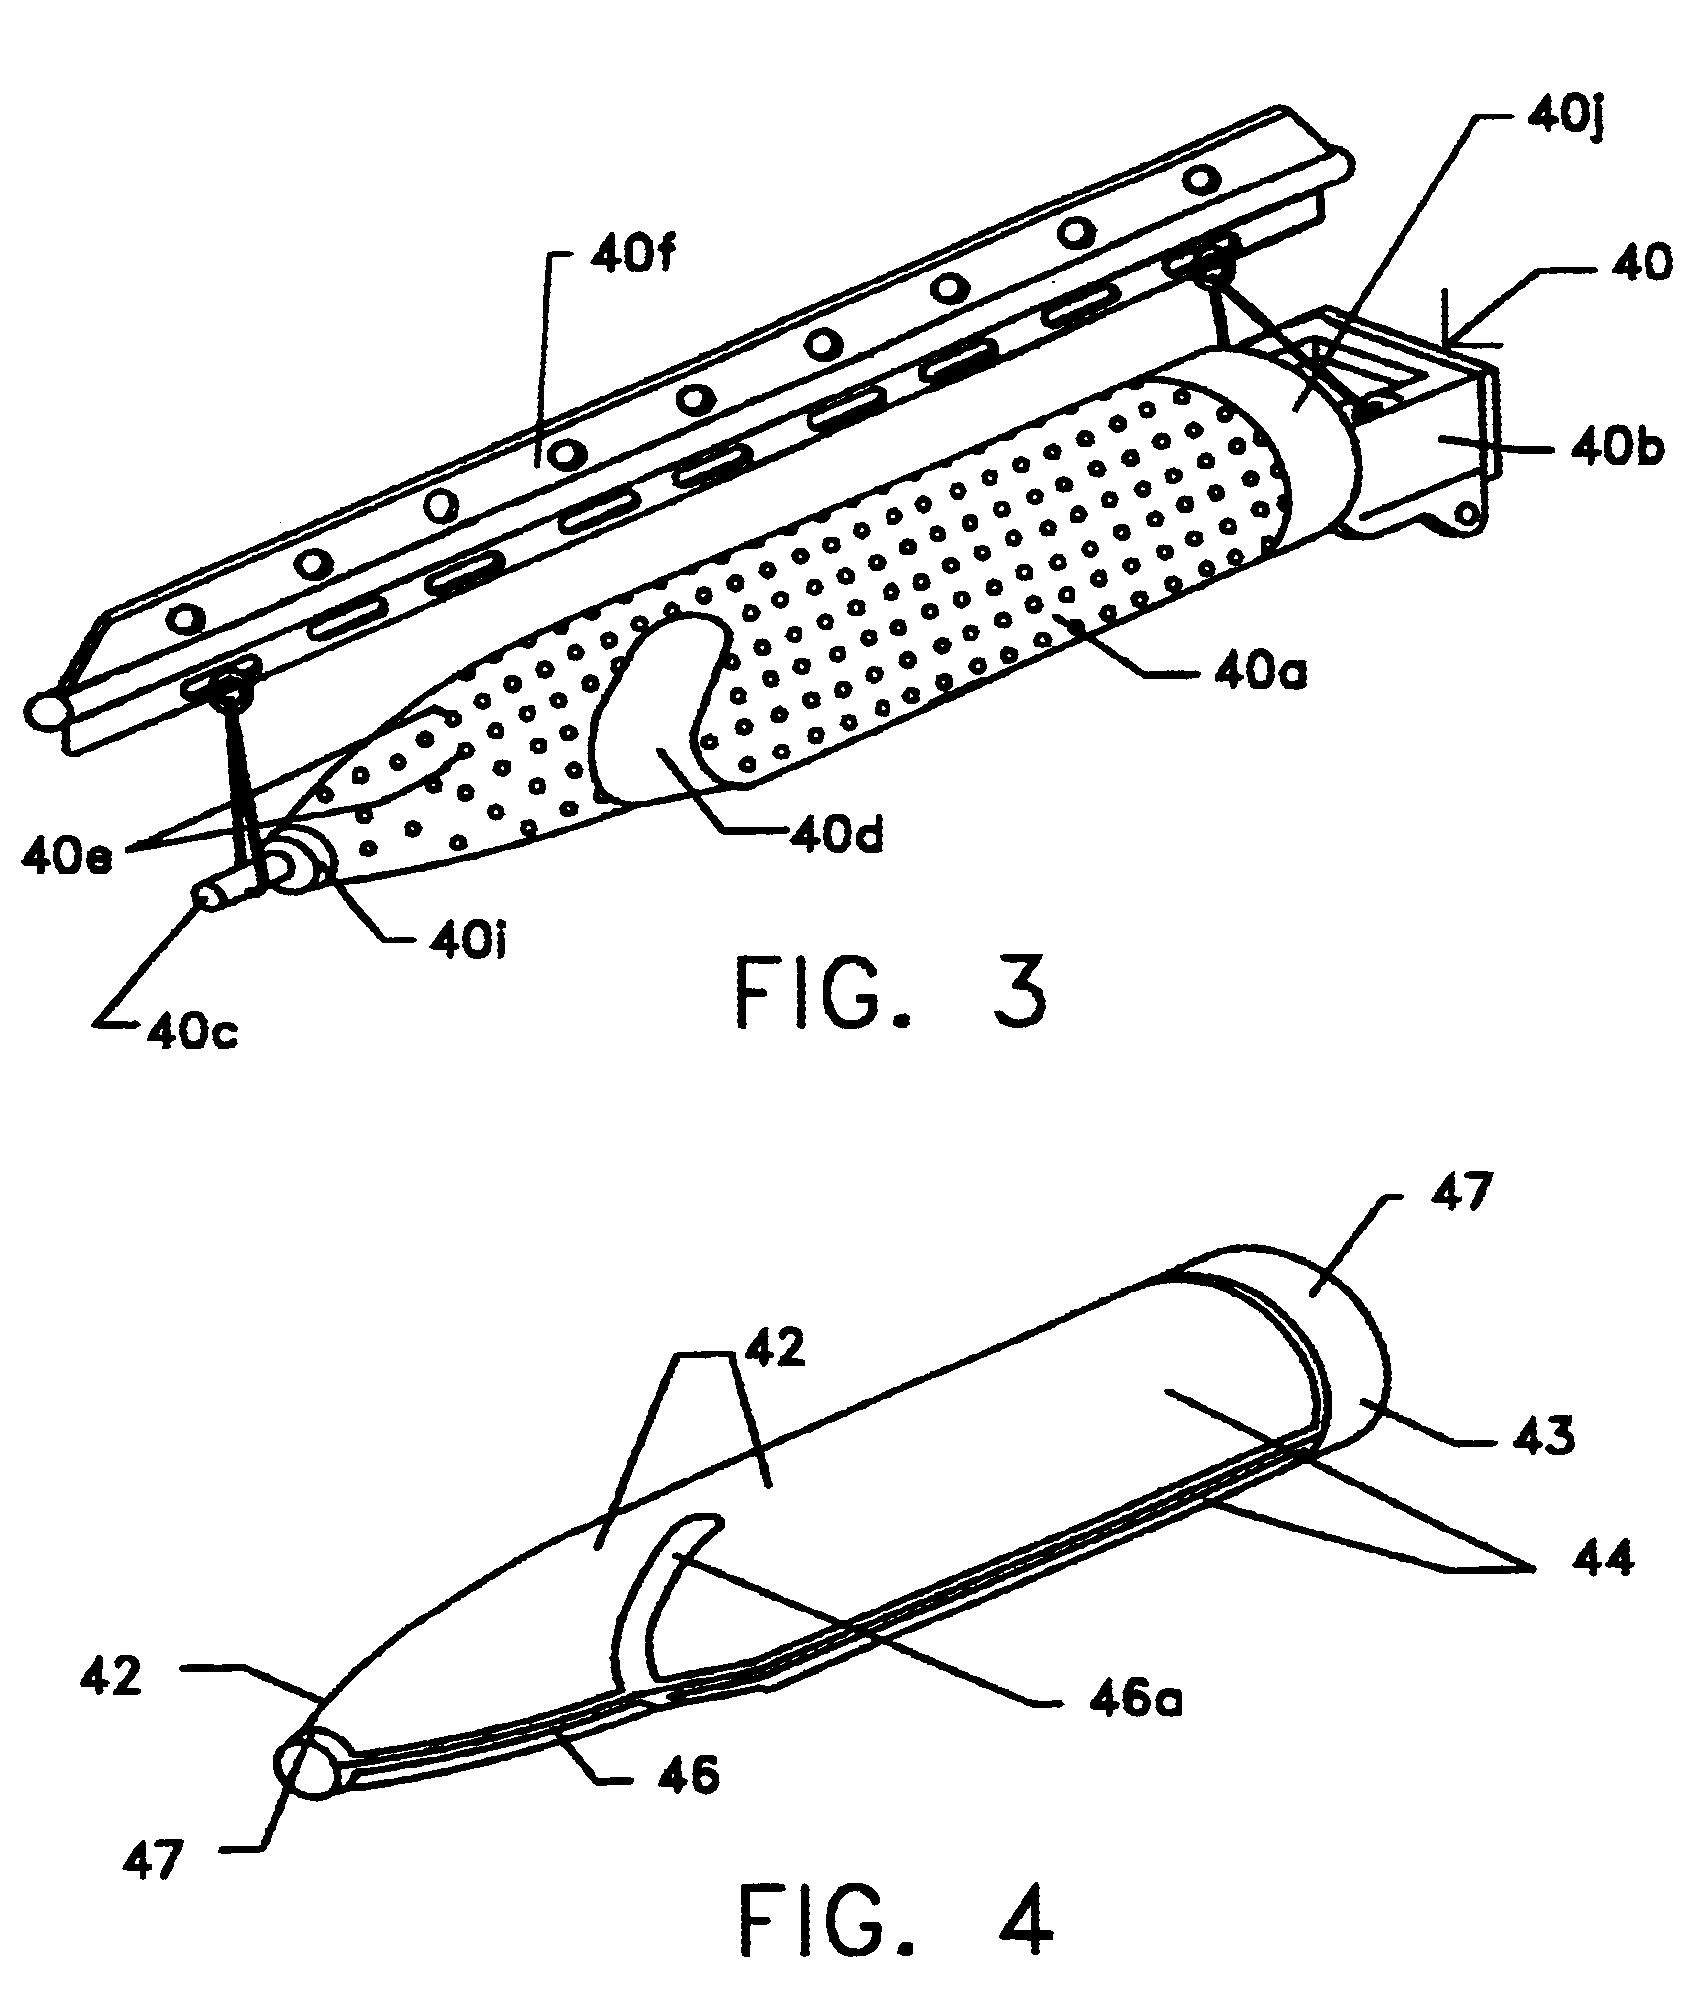 Method and apparatus for manufacturing composite structures